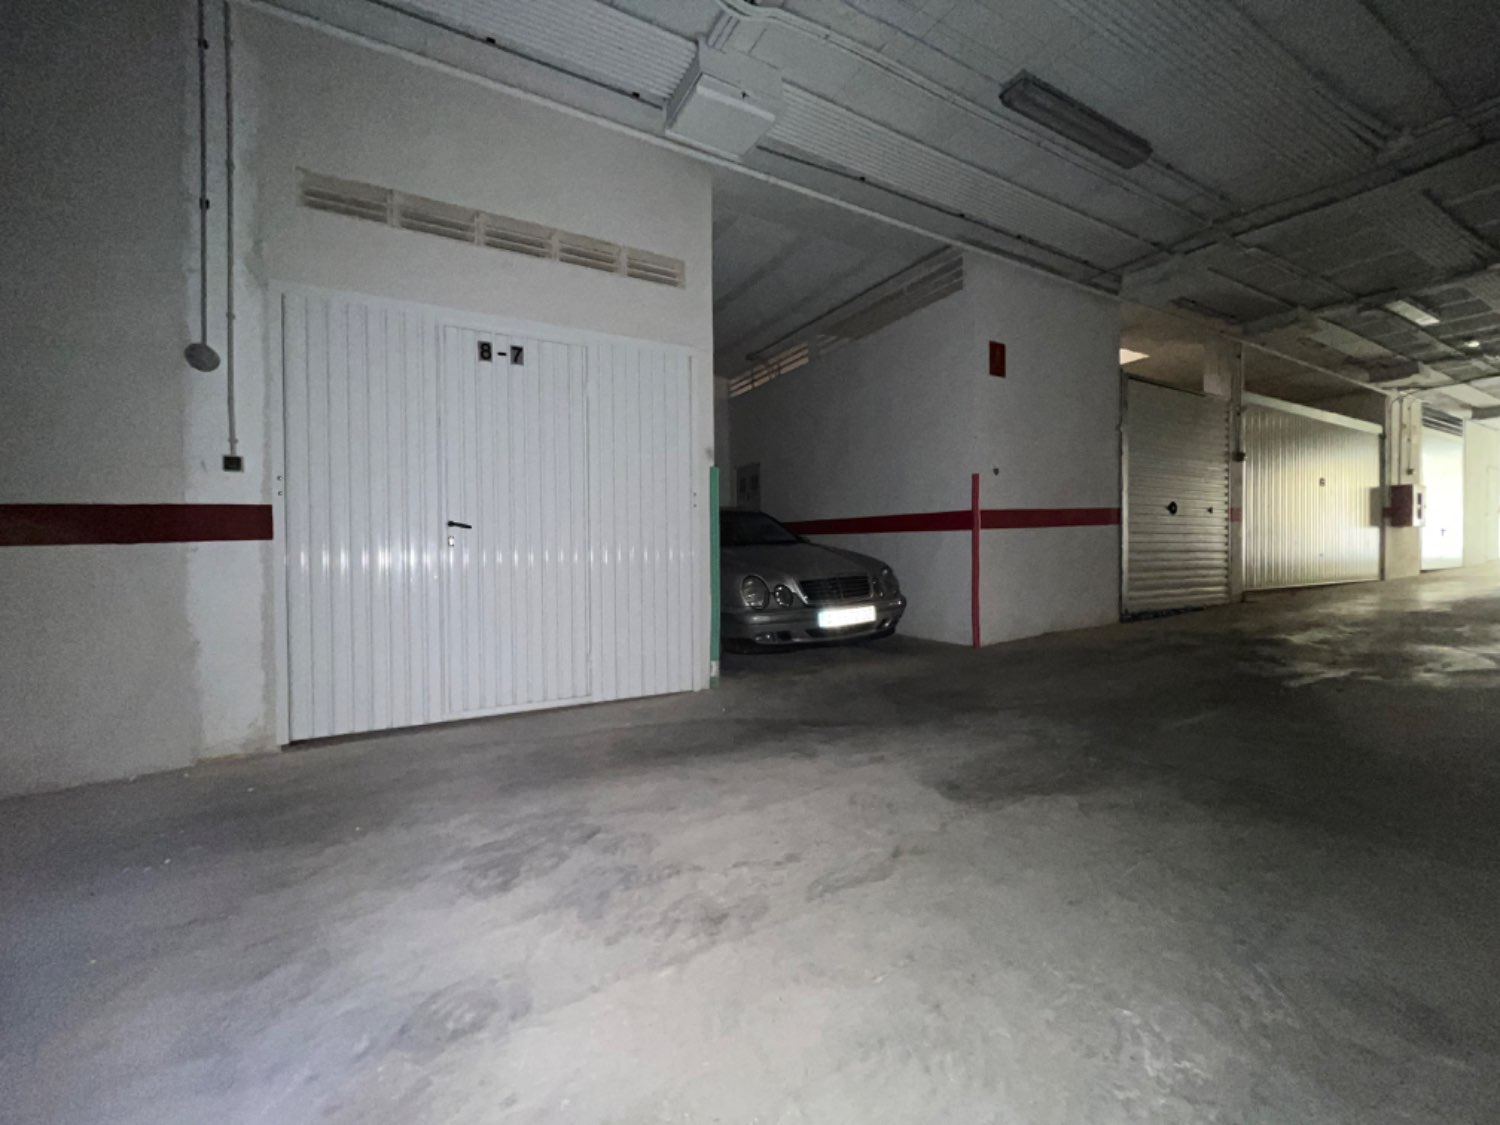 Enclosed double garage for 2 cars